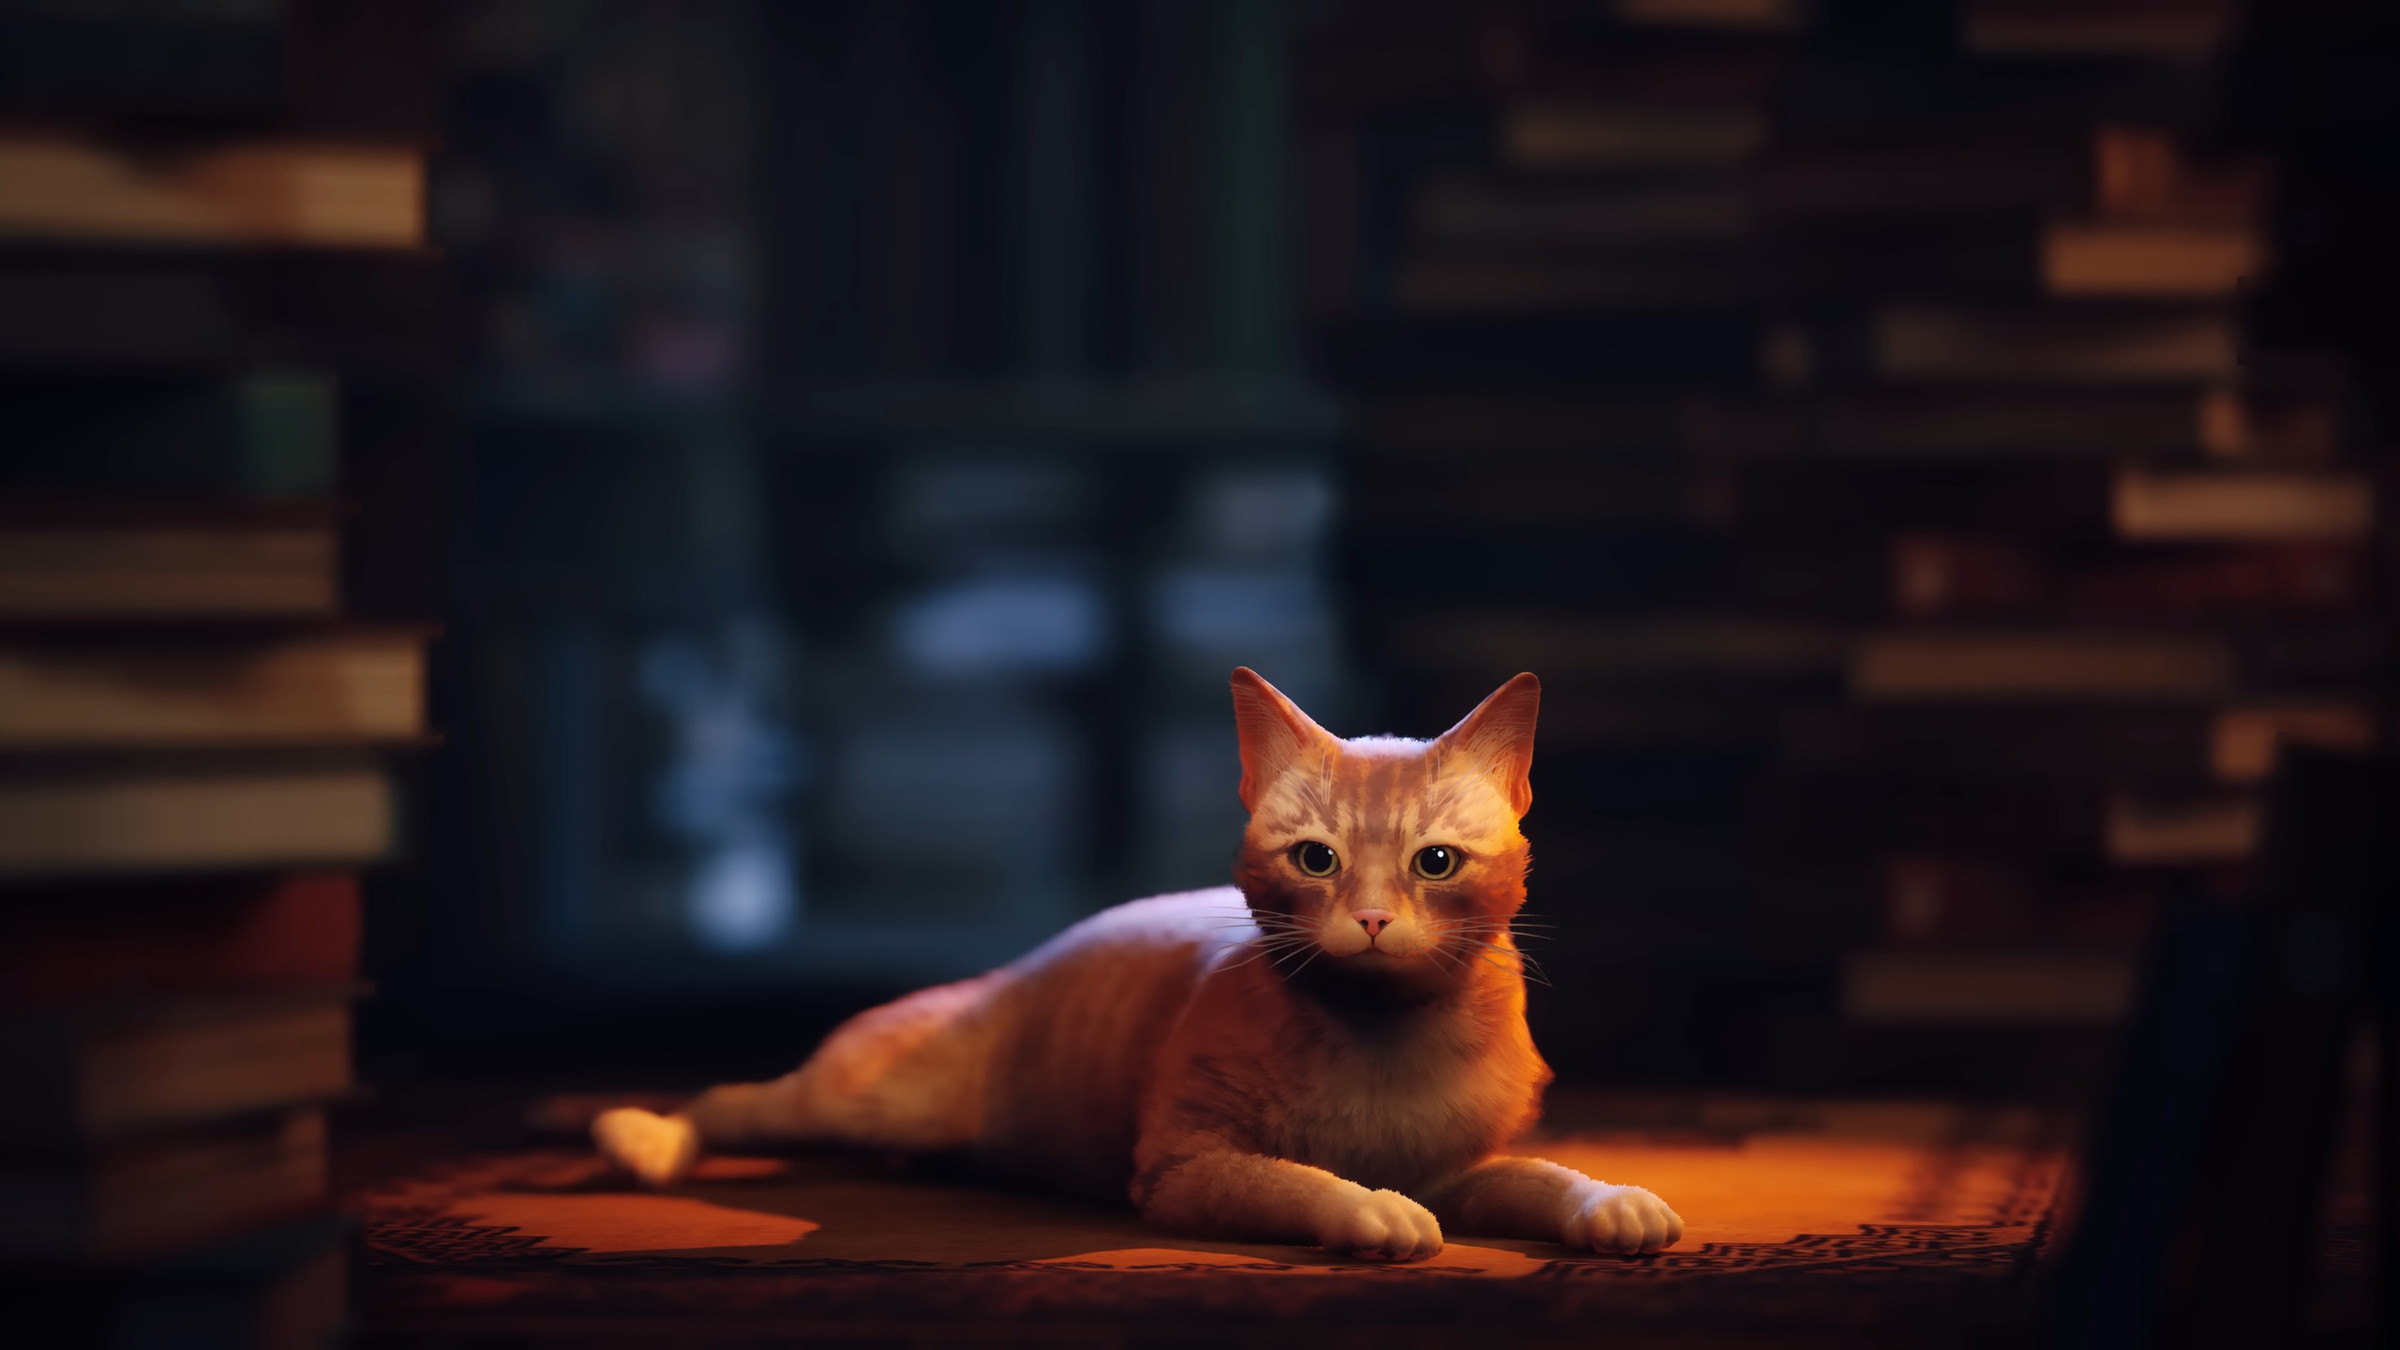 A screenshot of the cat from Stray.